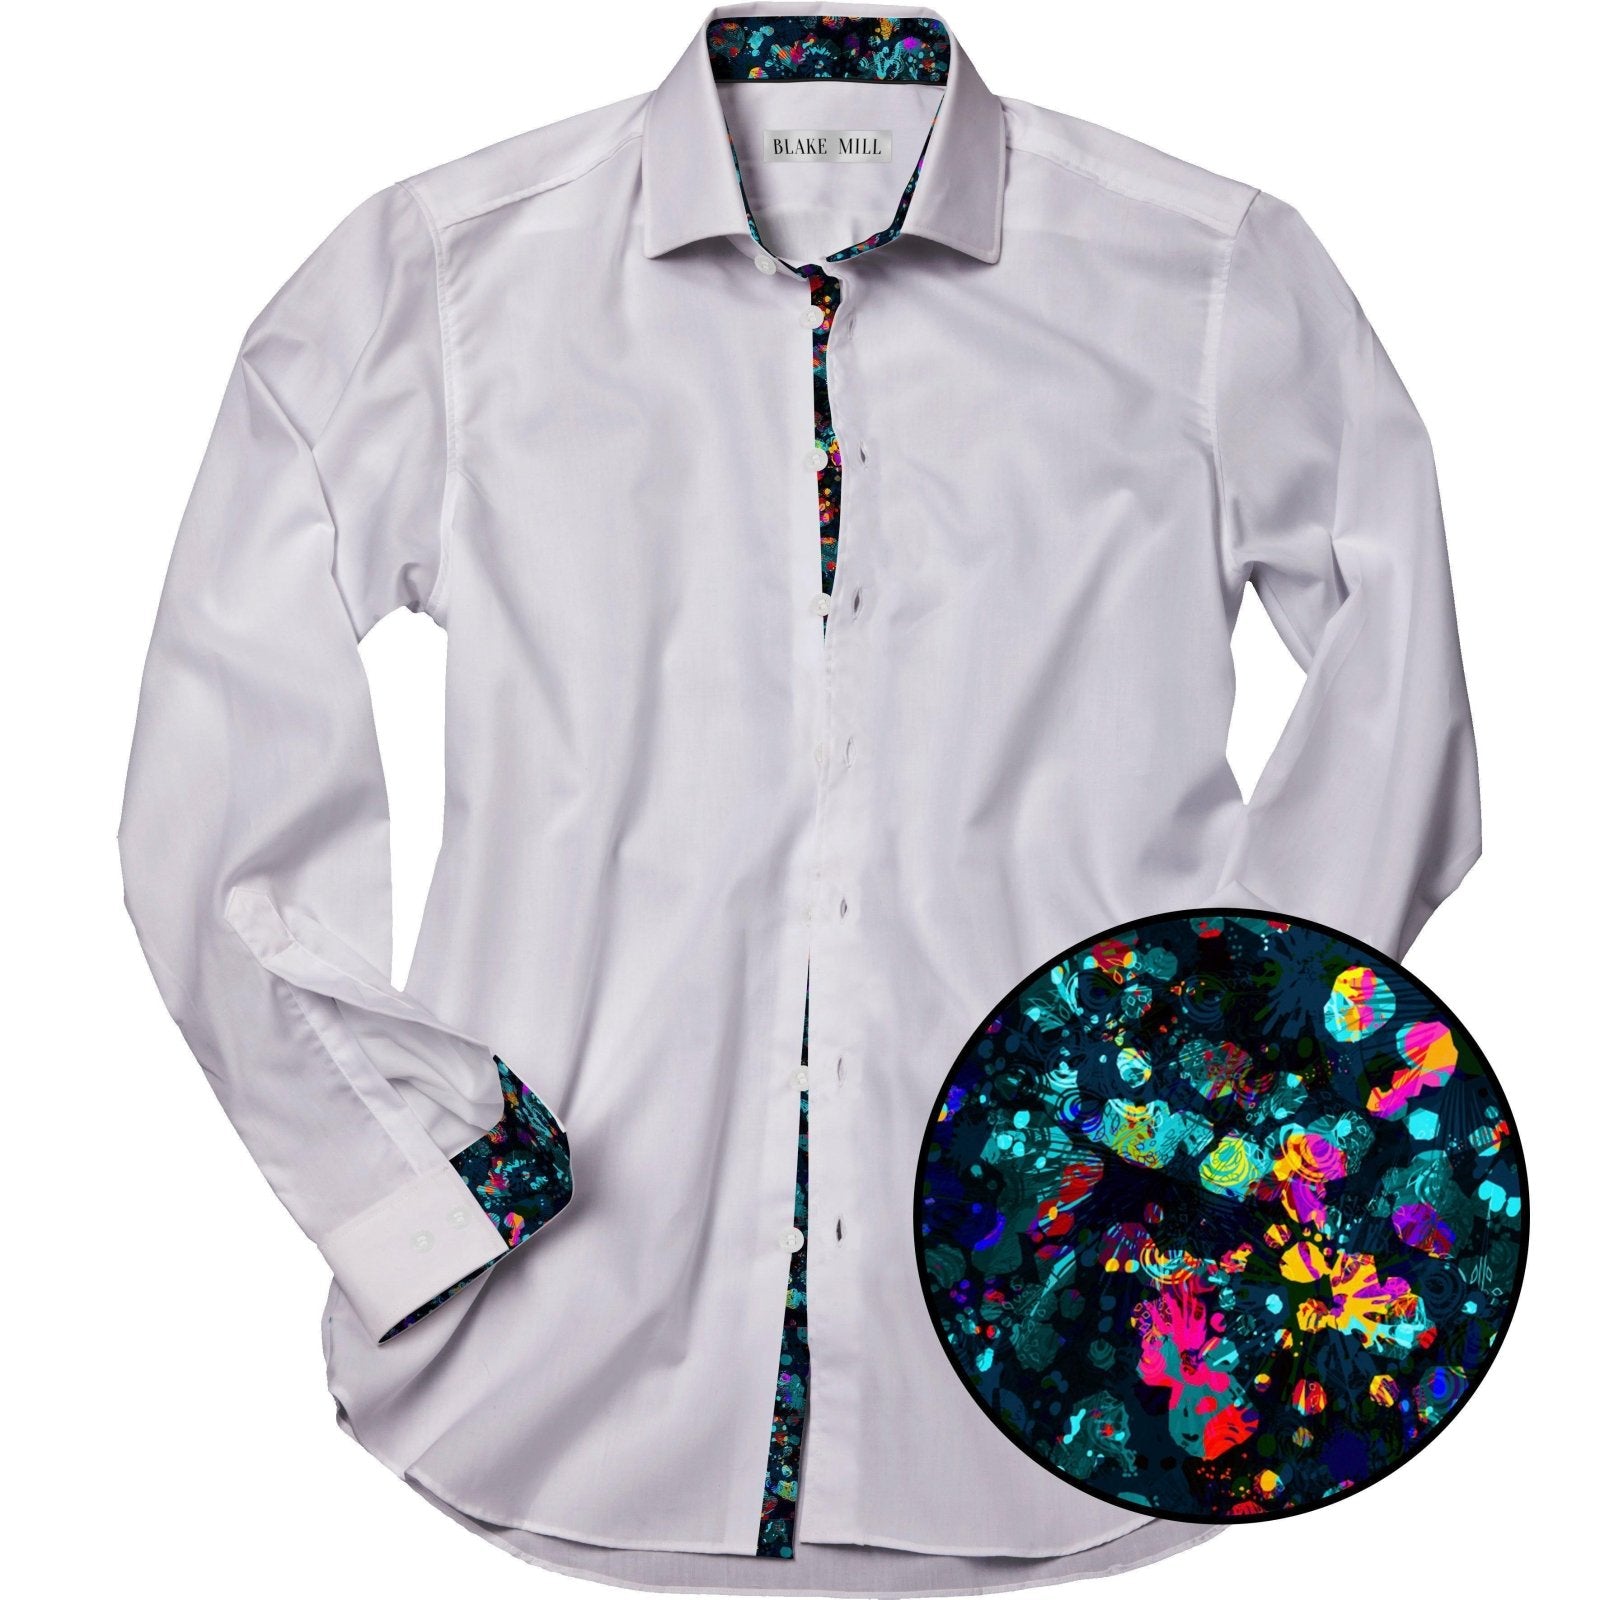 White with Octopus's Garden Accents Shirt - Blake Mill